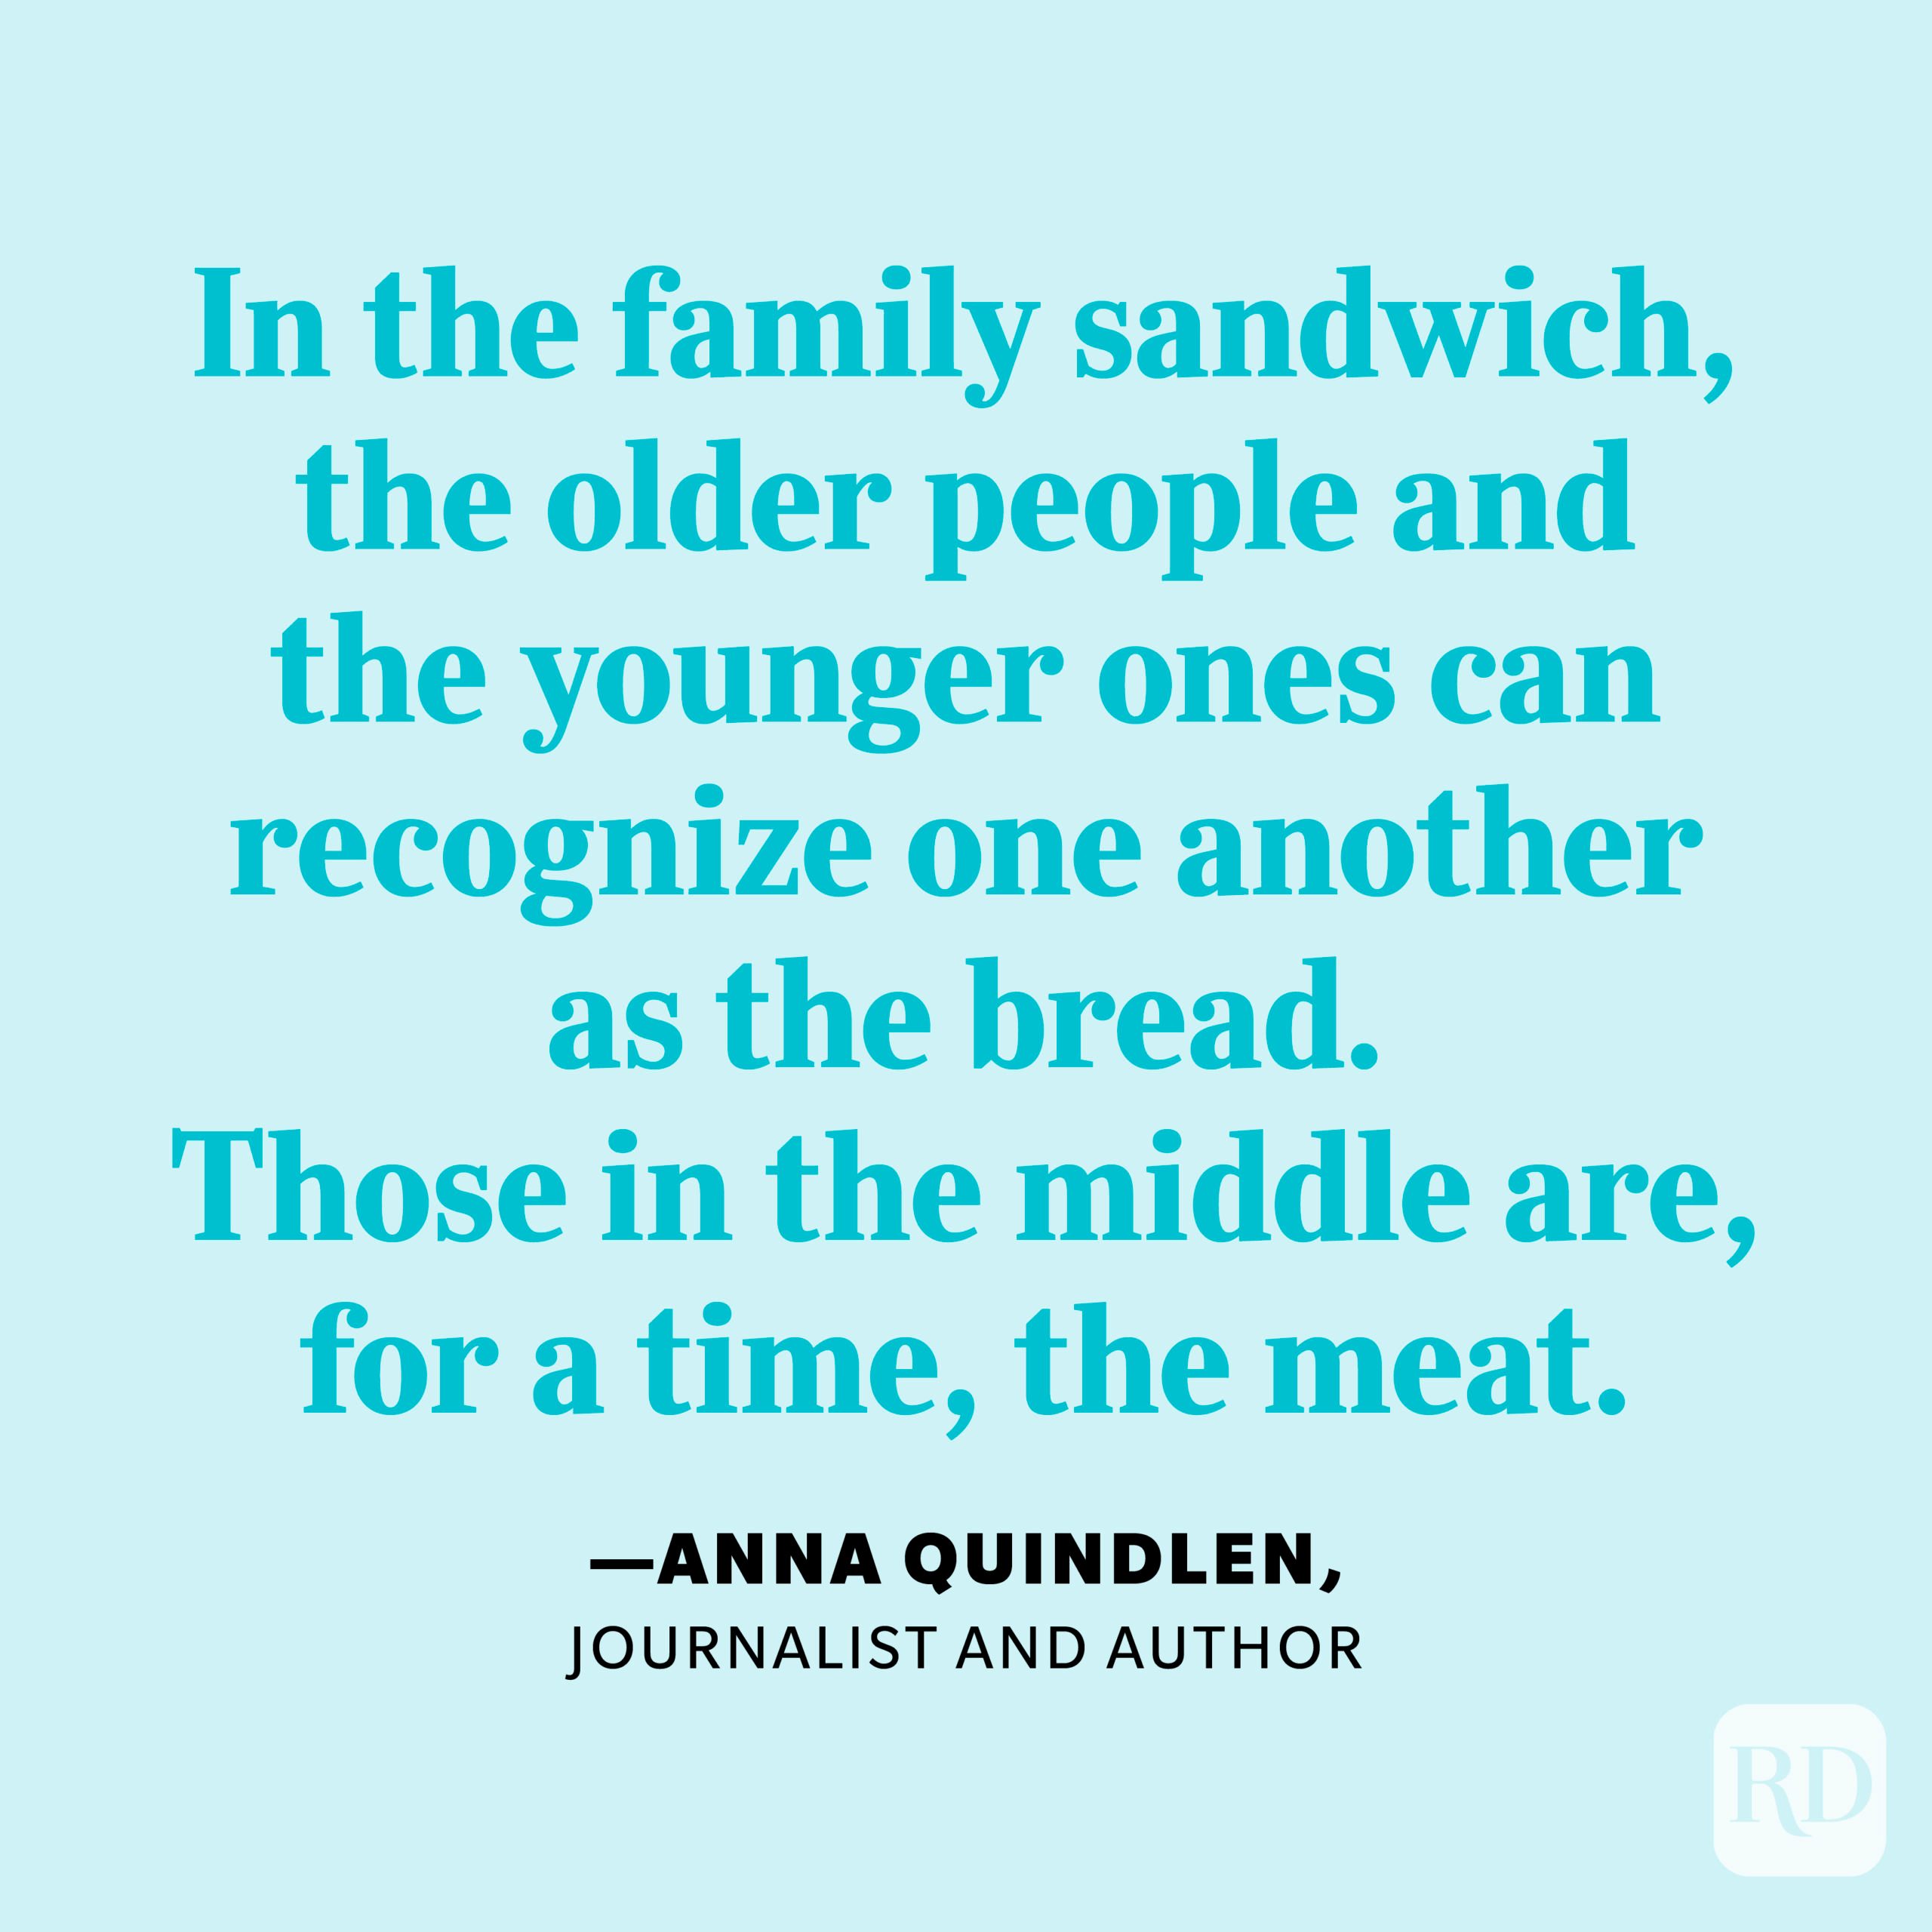 "In the family sandwich, the older people and the younger ones can recognize one another as the bread. Those in the middle are, for a time, the meat." —Anna Quindlen, journalist and author